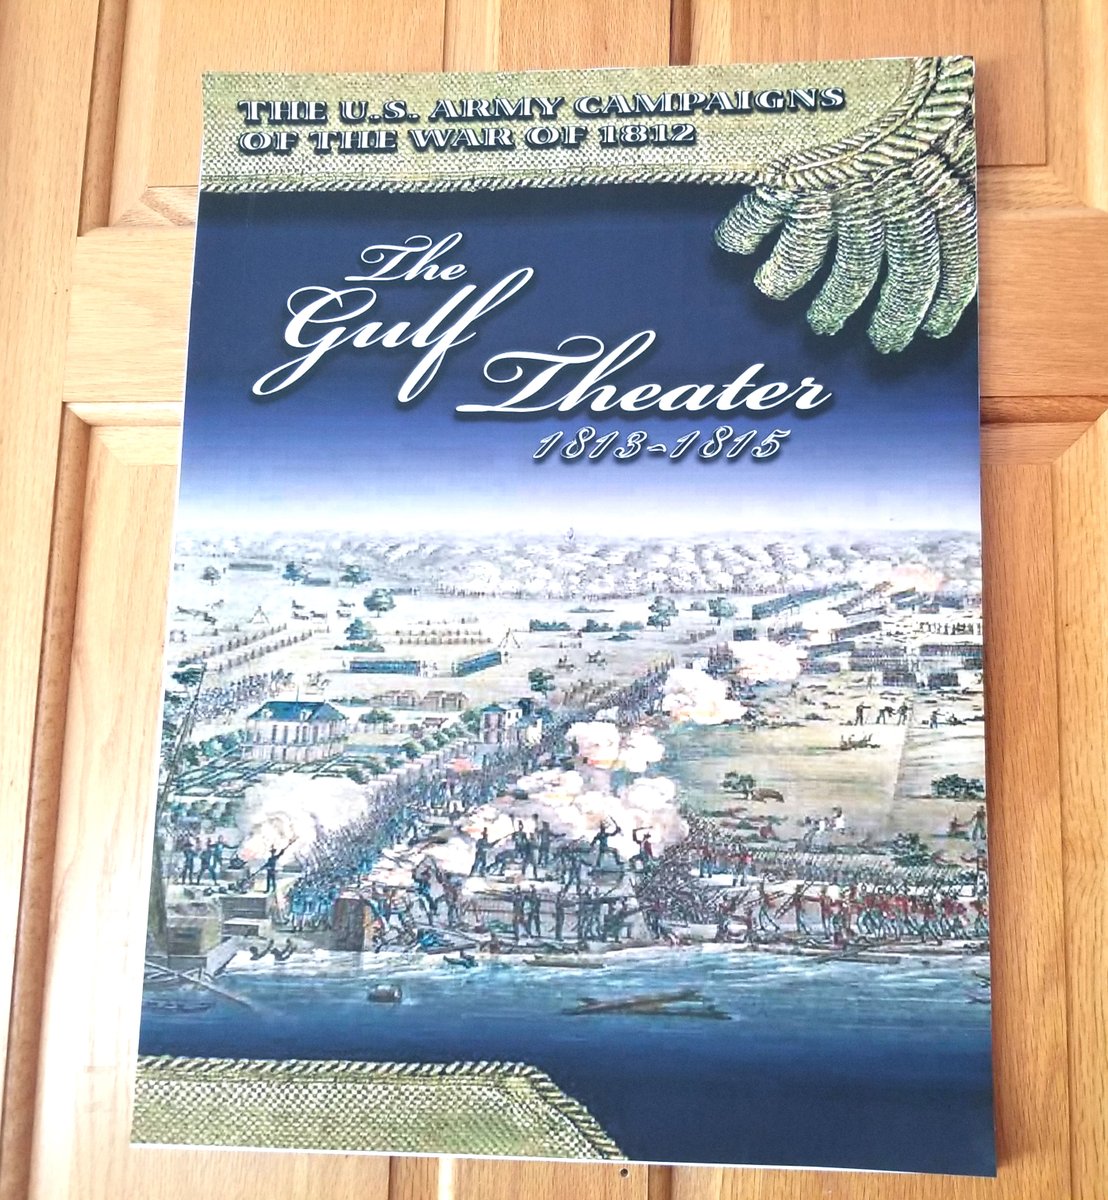 The Gulf Theater at the Military Heritage Museum is gearing up for a great season! From Almost Abba and The Best of Broadway to stage plays like A Midsummer Night’s Dream and A Raisin in the Sun (and much more), you're sure to find something you love!

#BestSideOutside #LoveFL